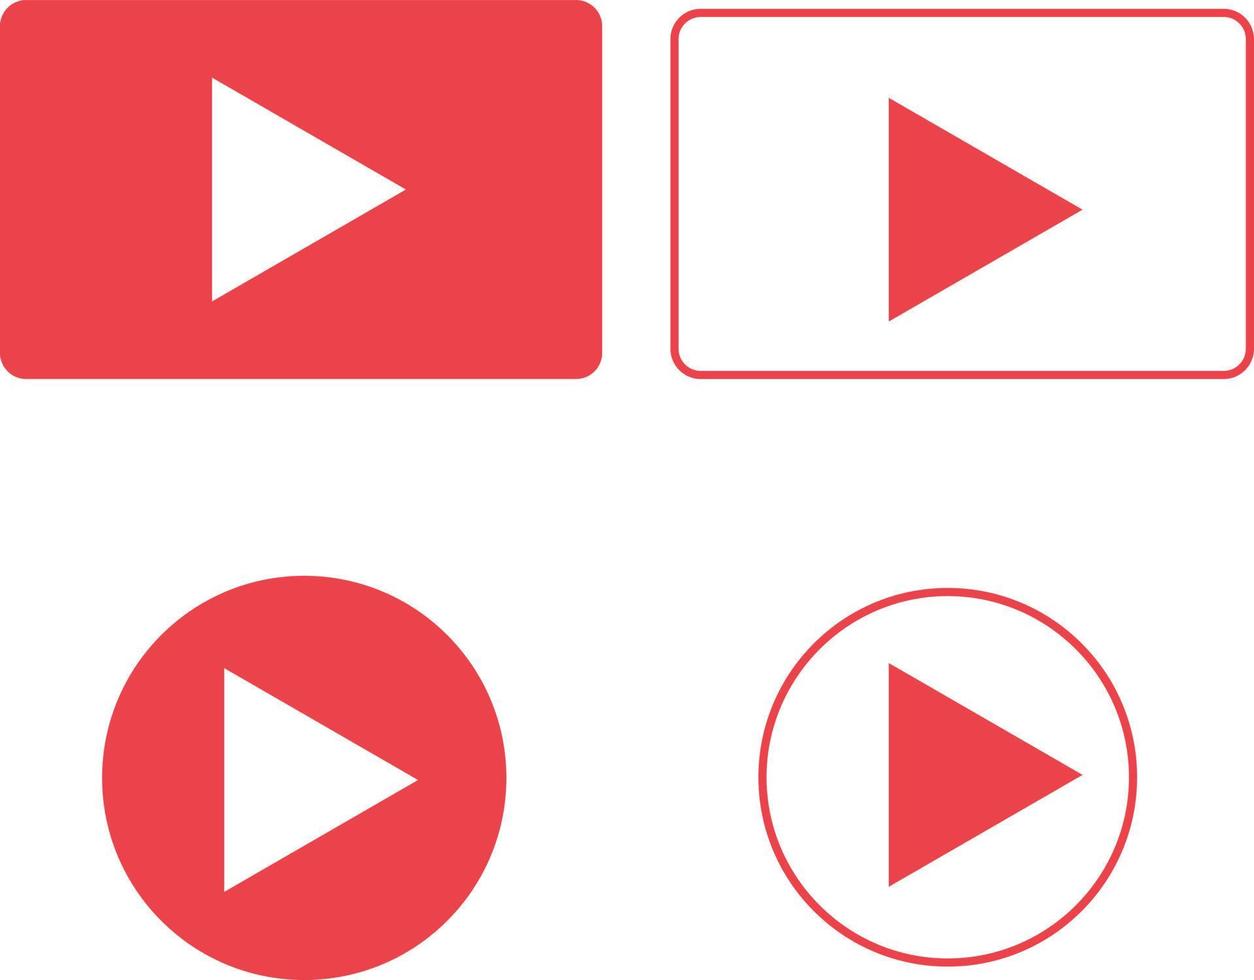 play button icon on white background. button sign. media player red symbol. flat style. vector